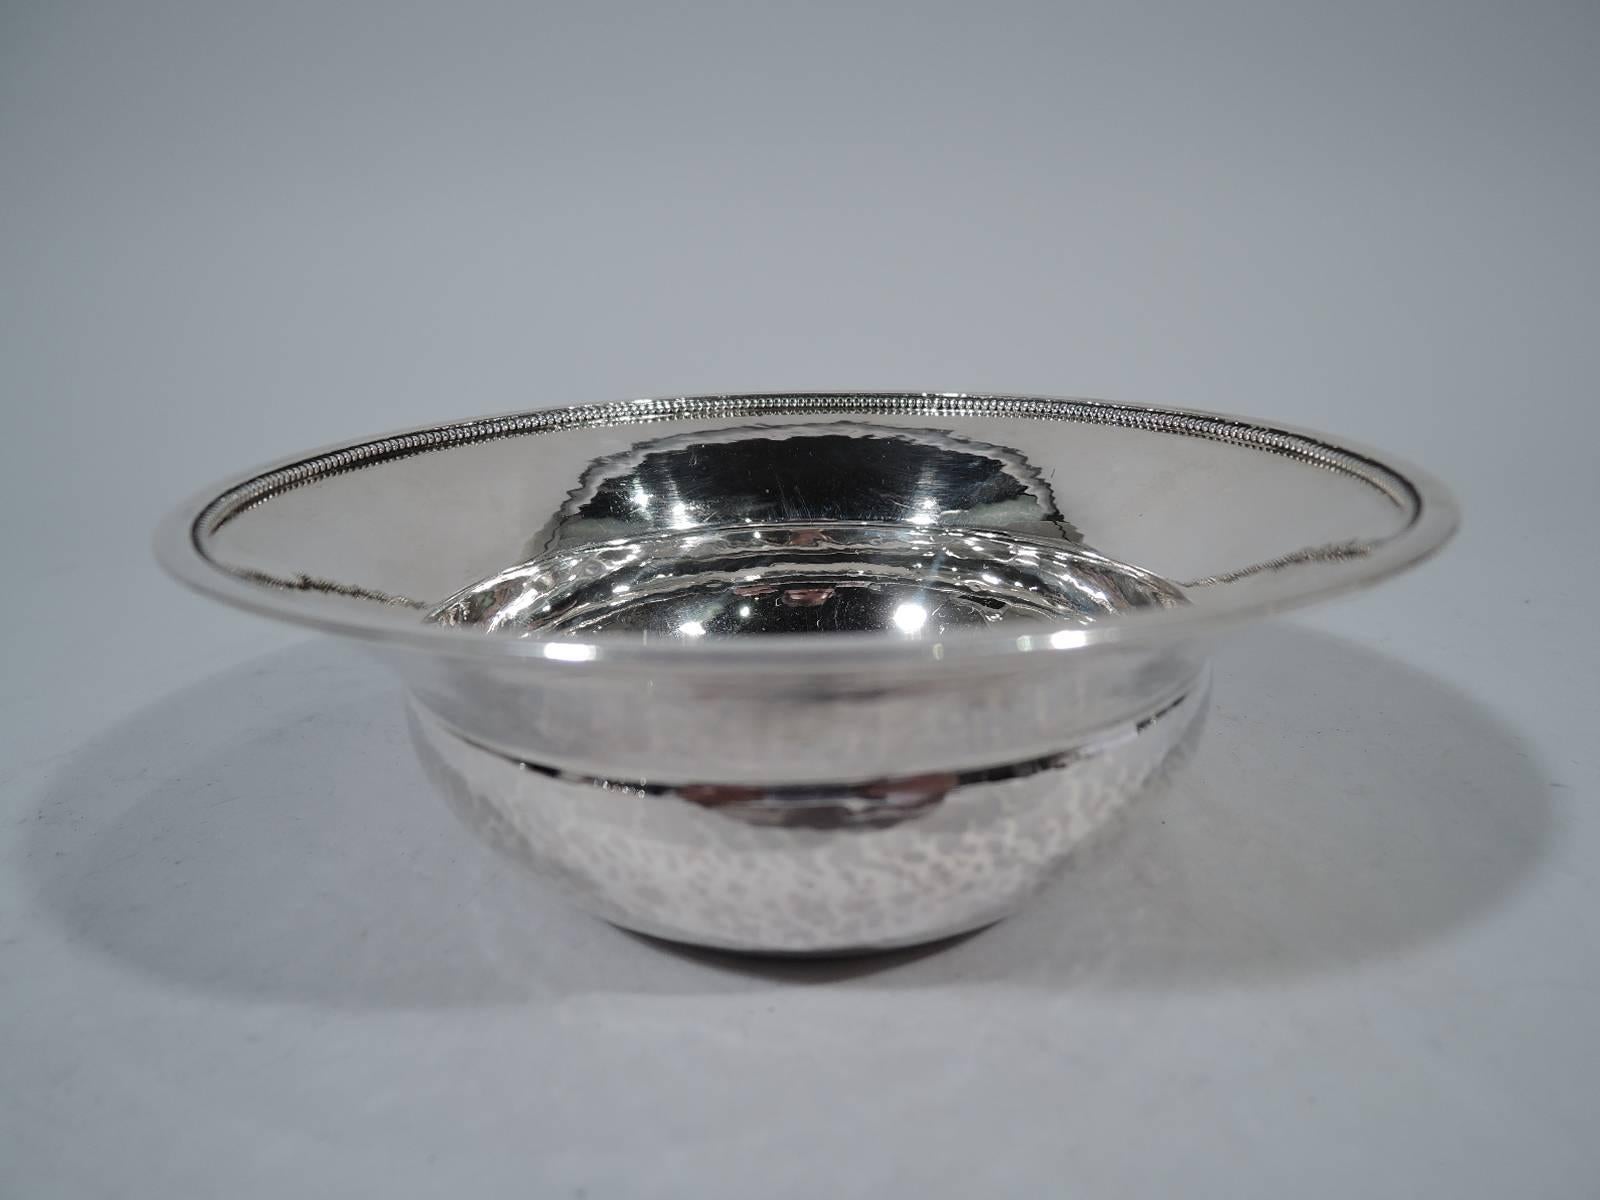 Sterling silver bowl. Made by Georg Jensen in Copenhagen. Bellied bowl and straight, tapering, and wide rim with applied beading. Visible hand hammering. An idiosyncratic design from the prewar years. Hallmark (circa 1933-1944) with no. 379. Weight: